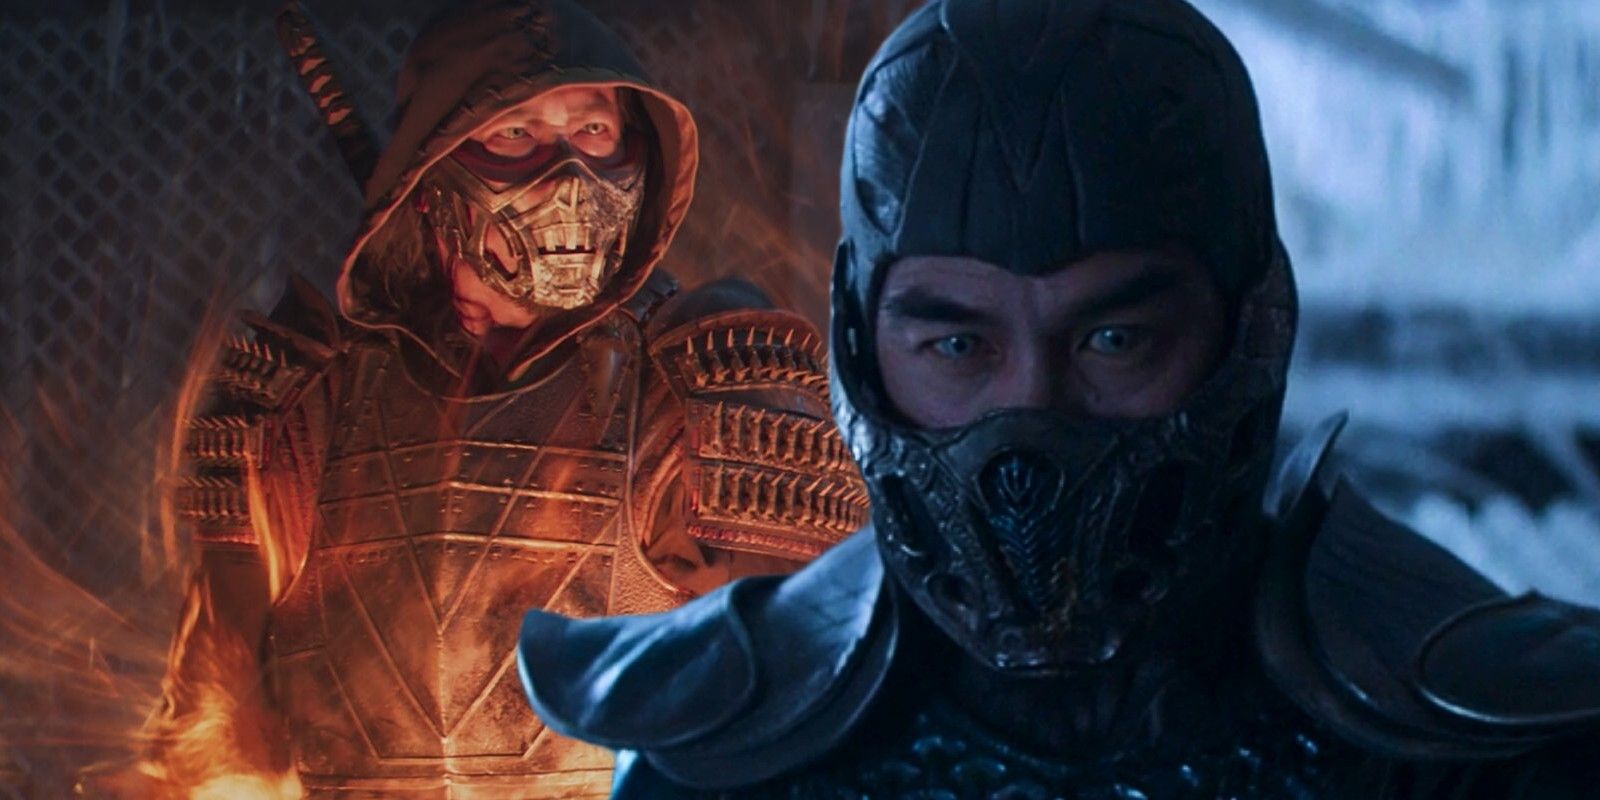 Mortal Kombat 2021 Cast: Characters, Powers & Video Game Changes Guide